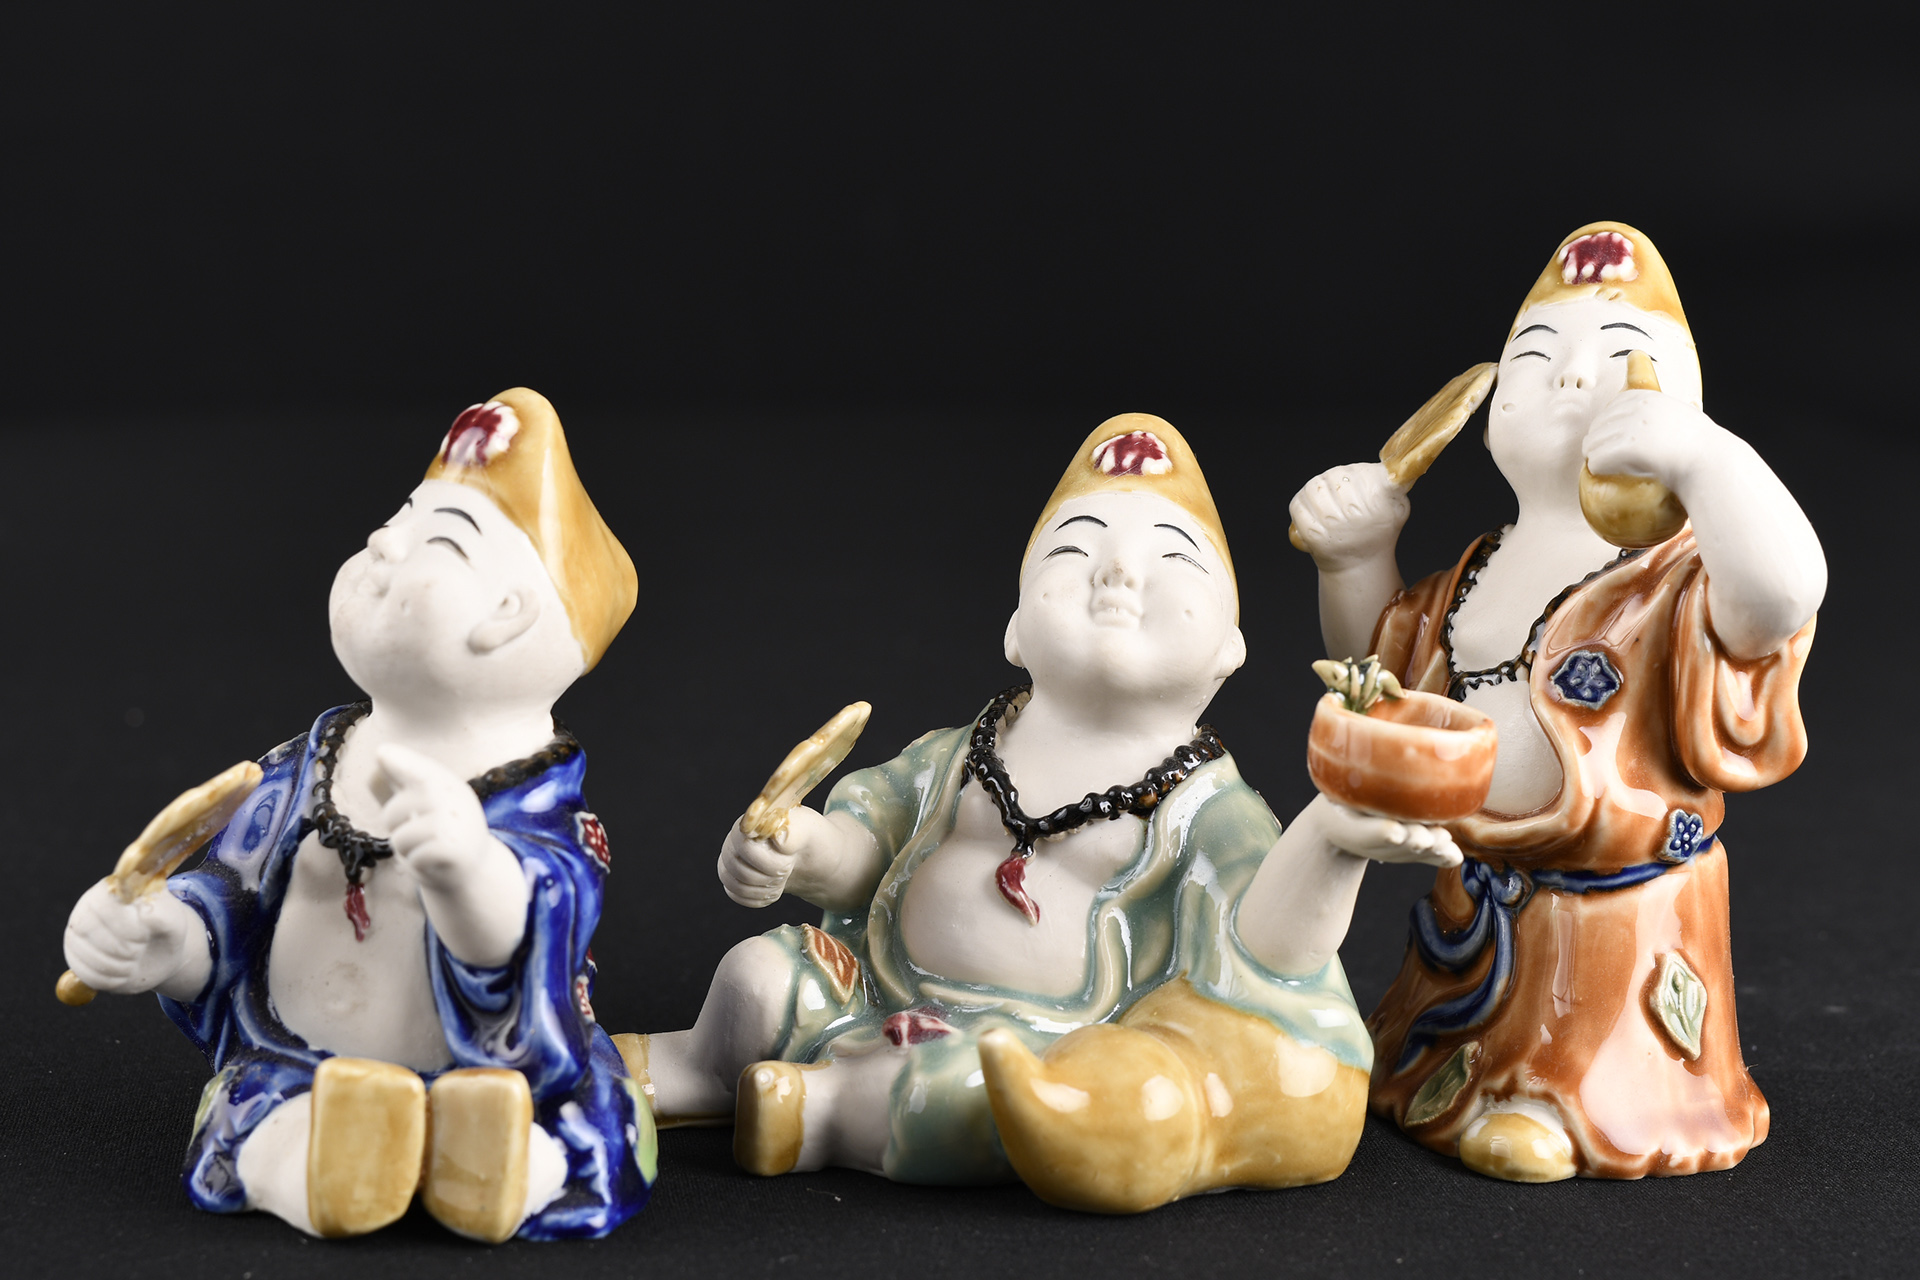 Set of 3 Porcelain Chinese Figures.